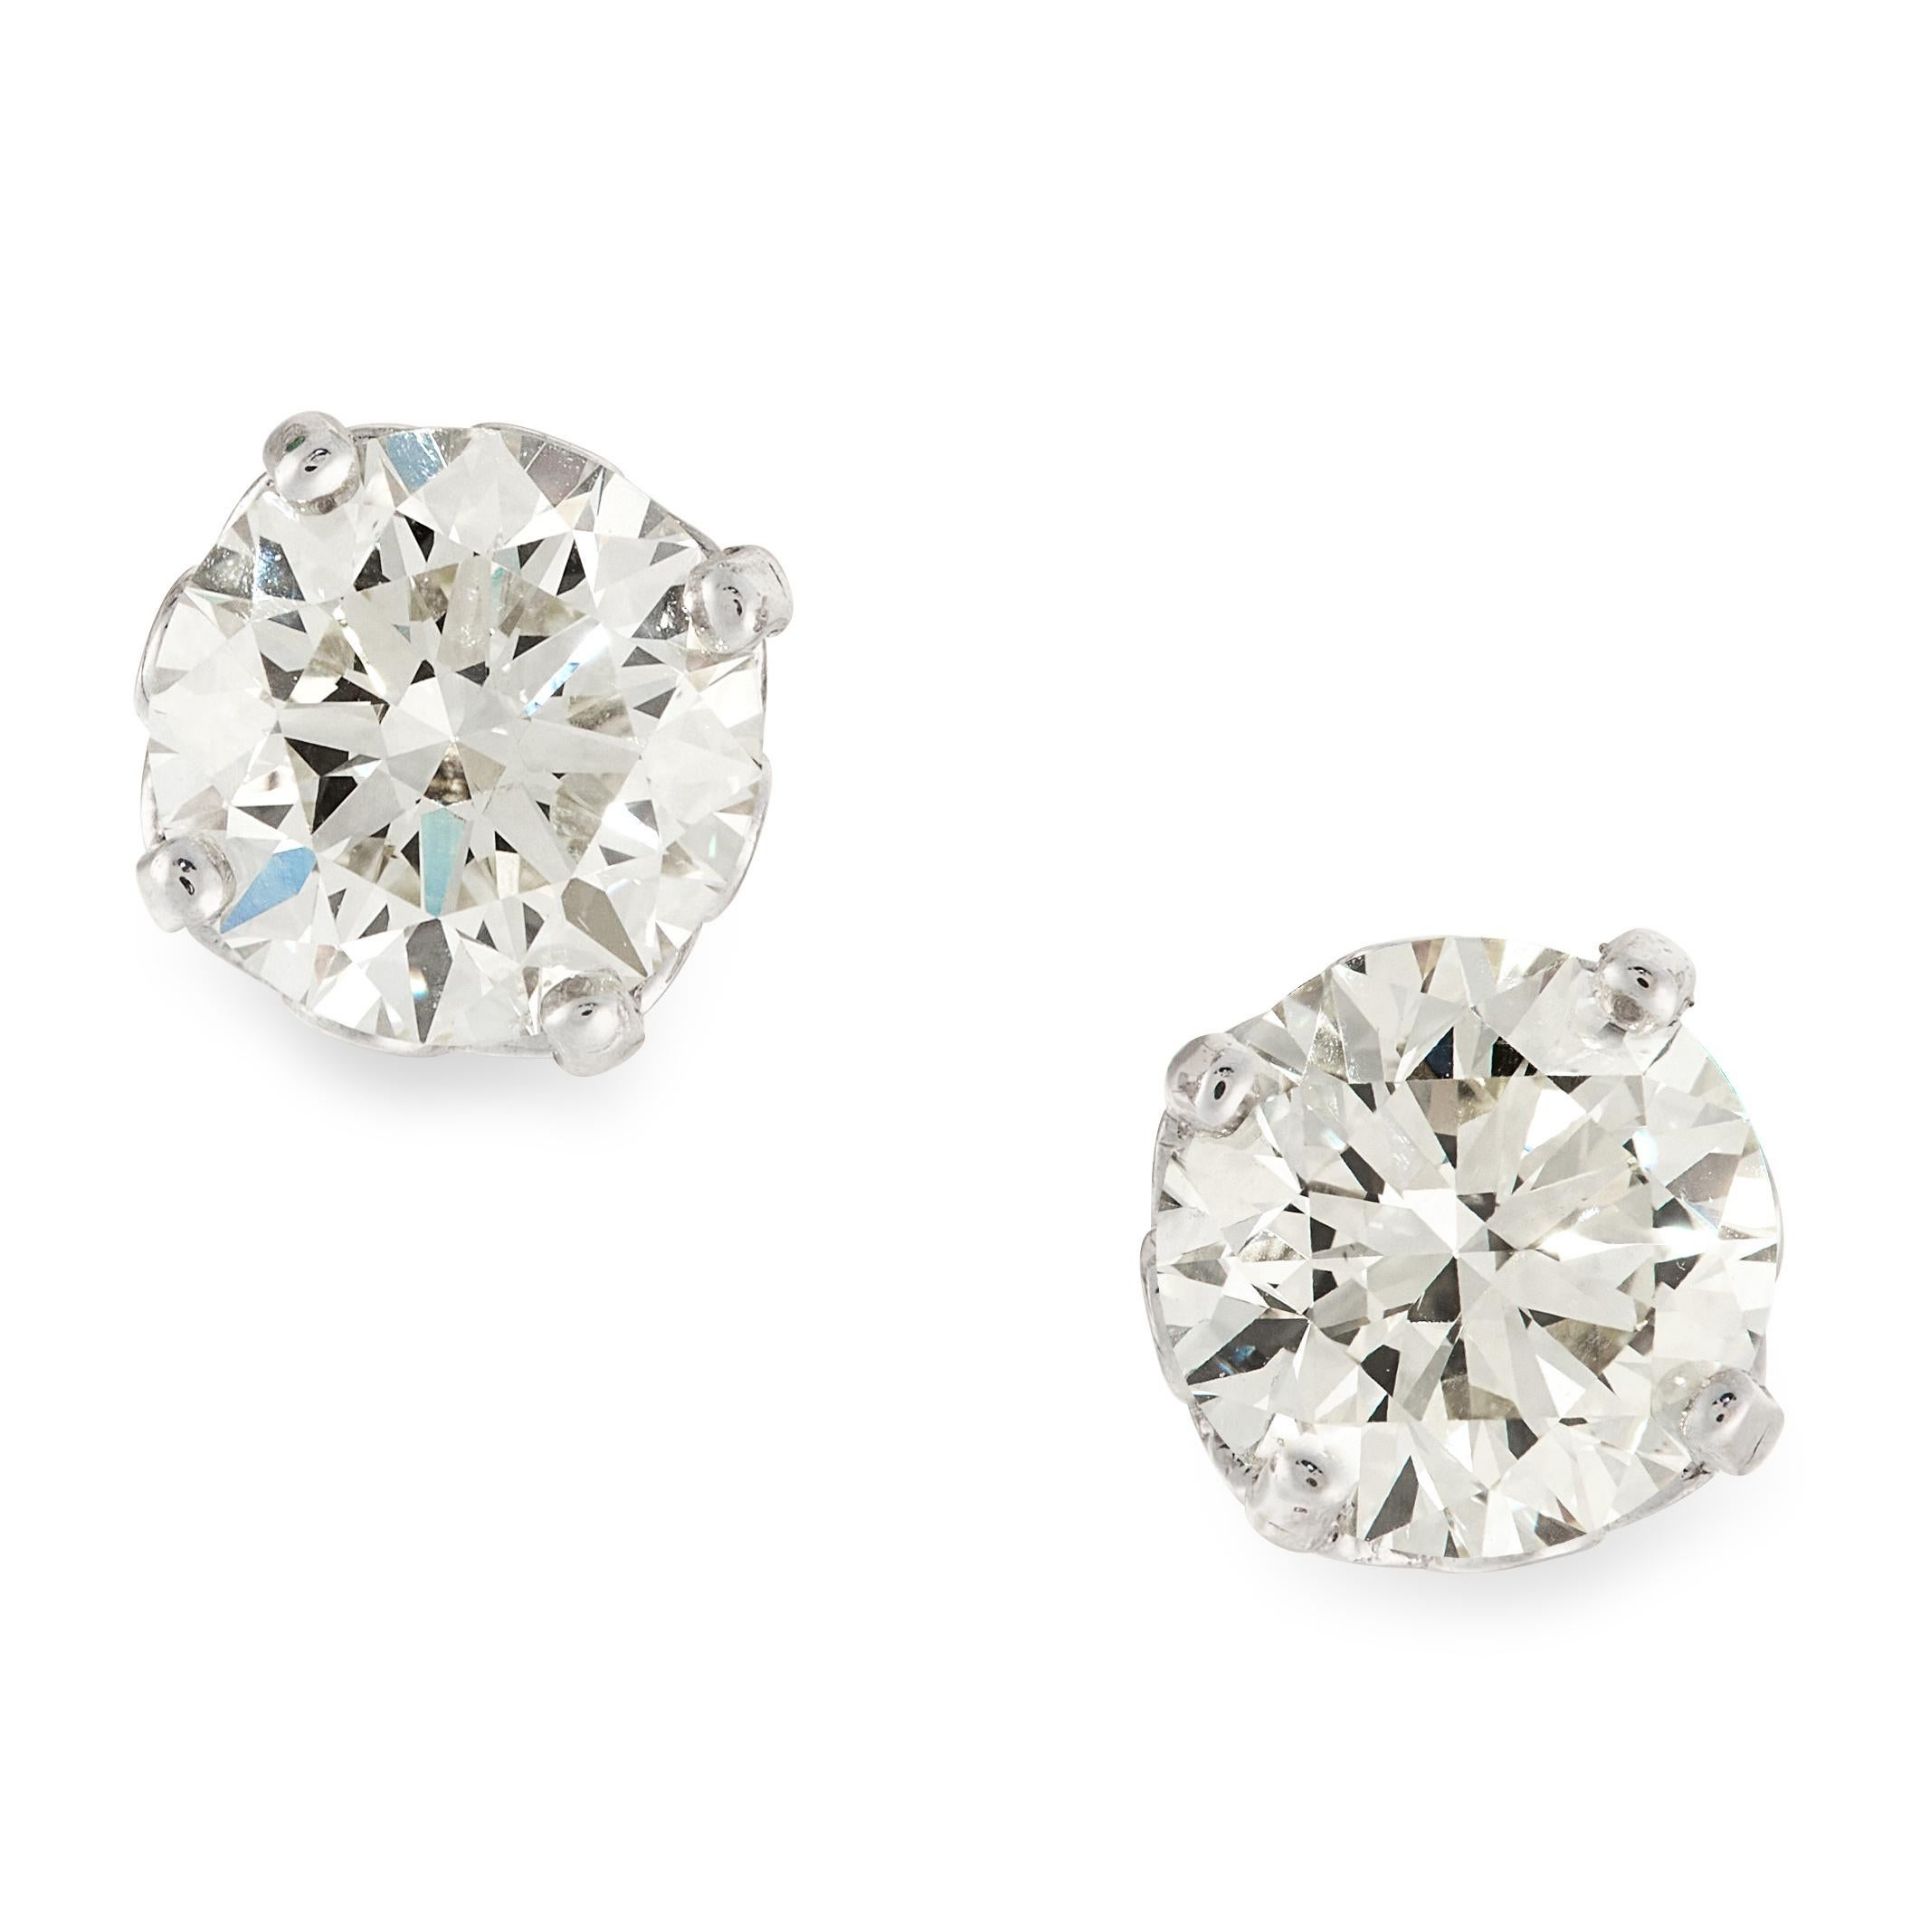 A PAIR OF 4.02 CARAT SOLITAIRE DIAMOND STUD EARRINGS in 18ct white gold, each set with a round cut